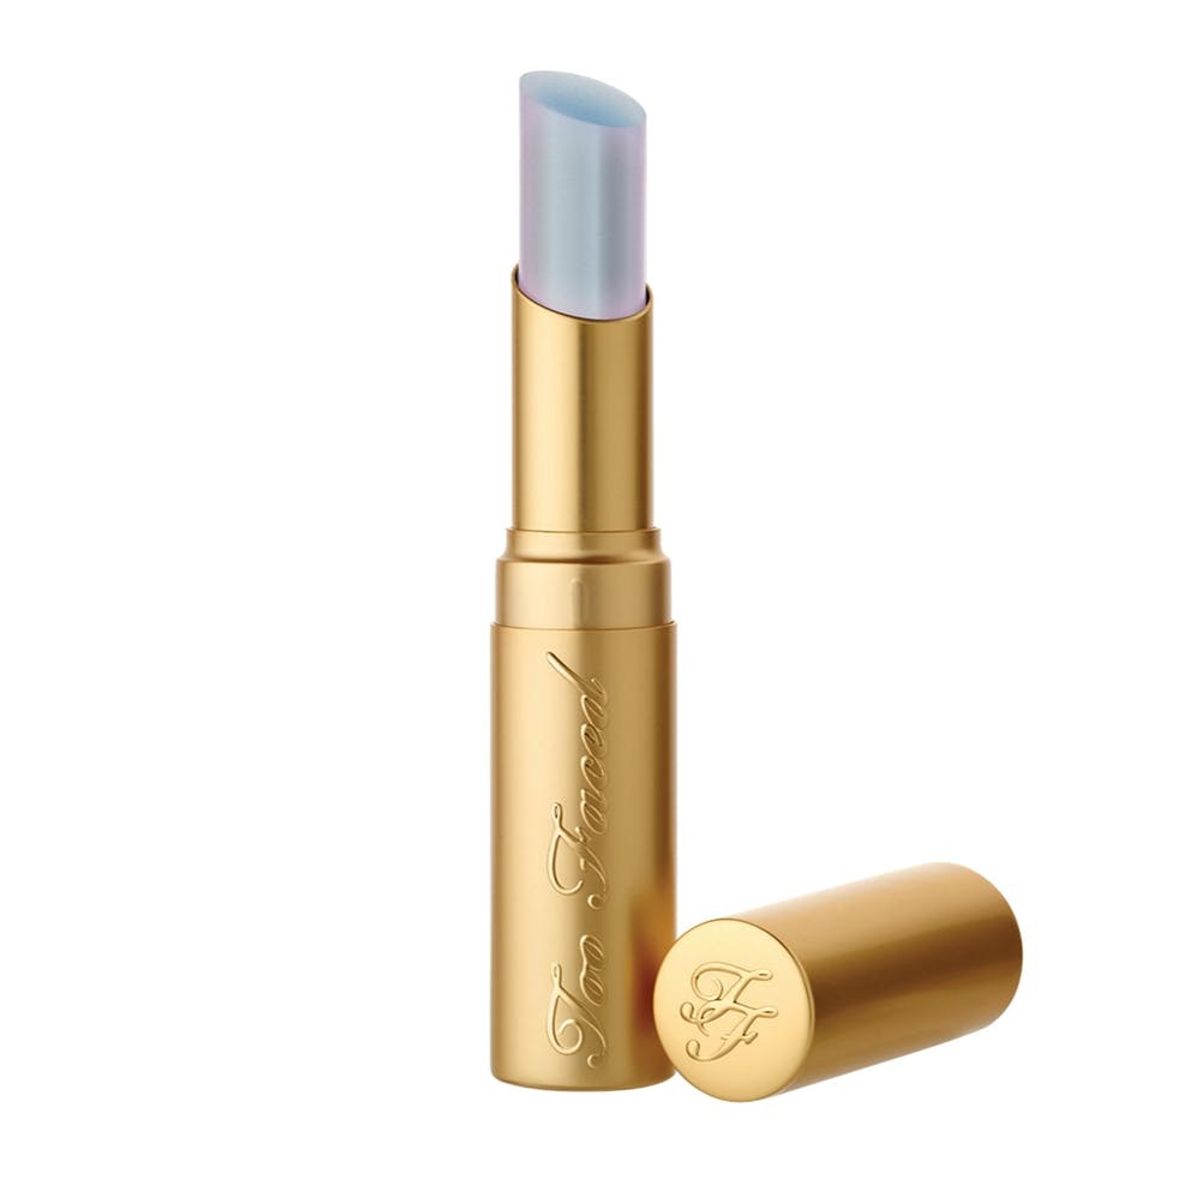 Too Faced’s Unicorn Tears Lipstick Is the Only Beauty Product You’ll Need This Holiday Season